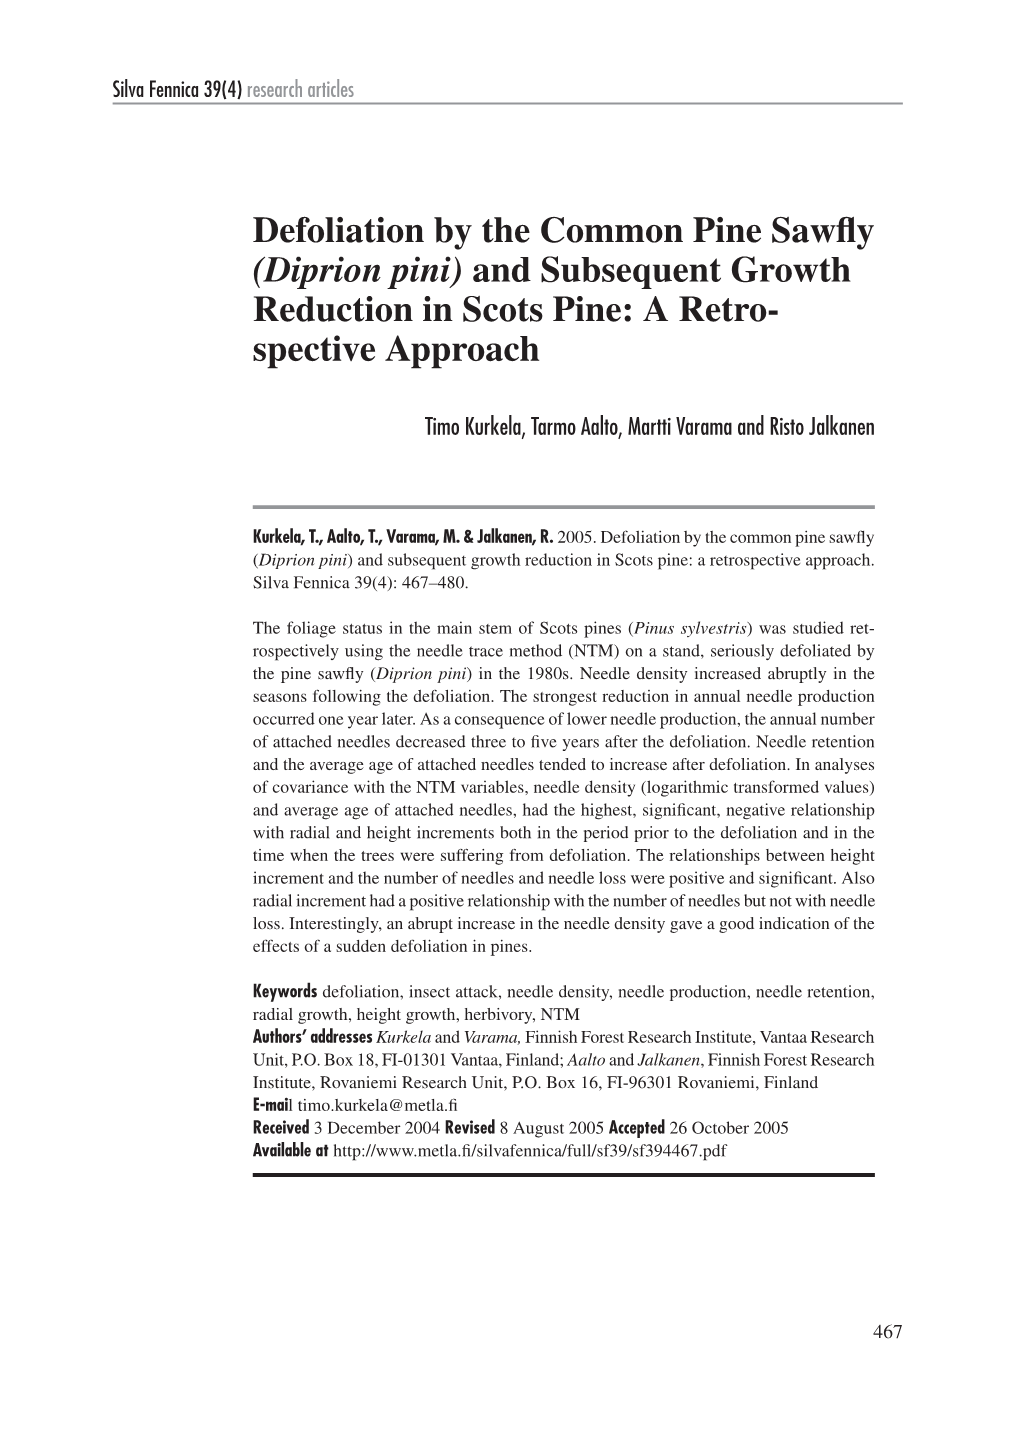 Diprion Pini) and Subsequent Growth Reduction in Scots Pine: a Retro- Spective Approach